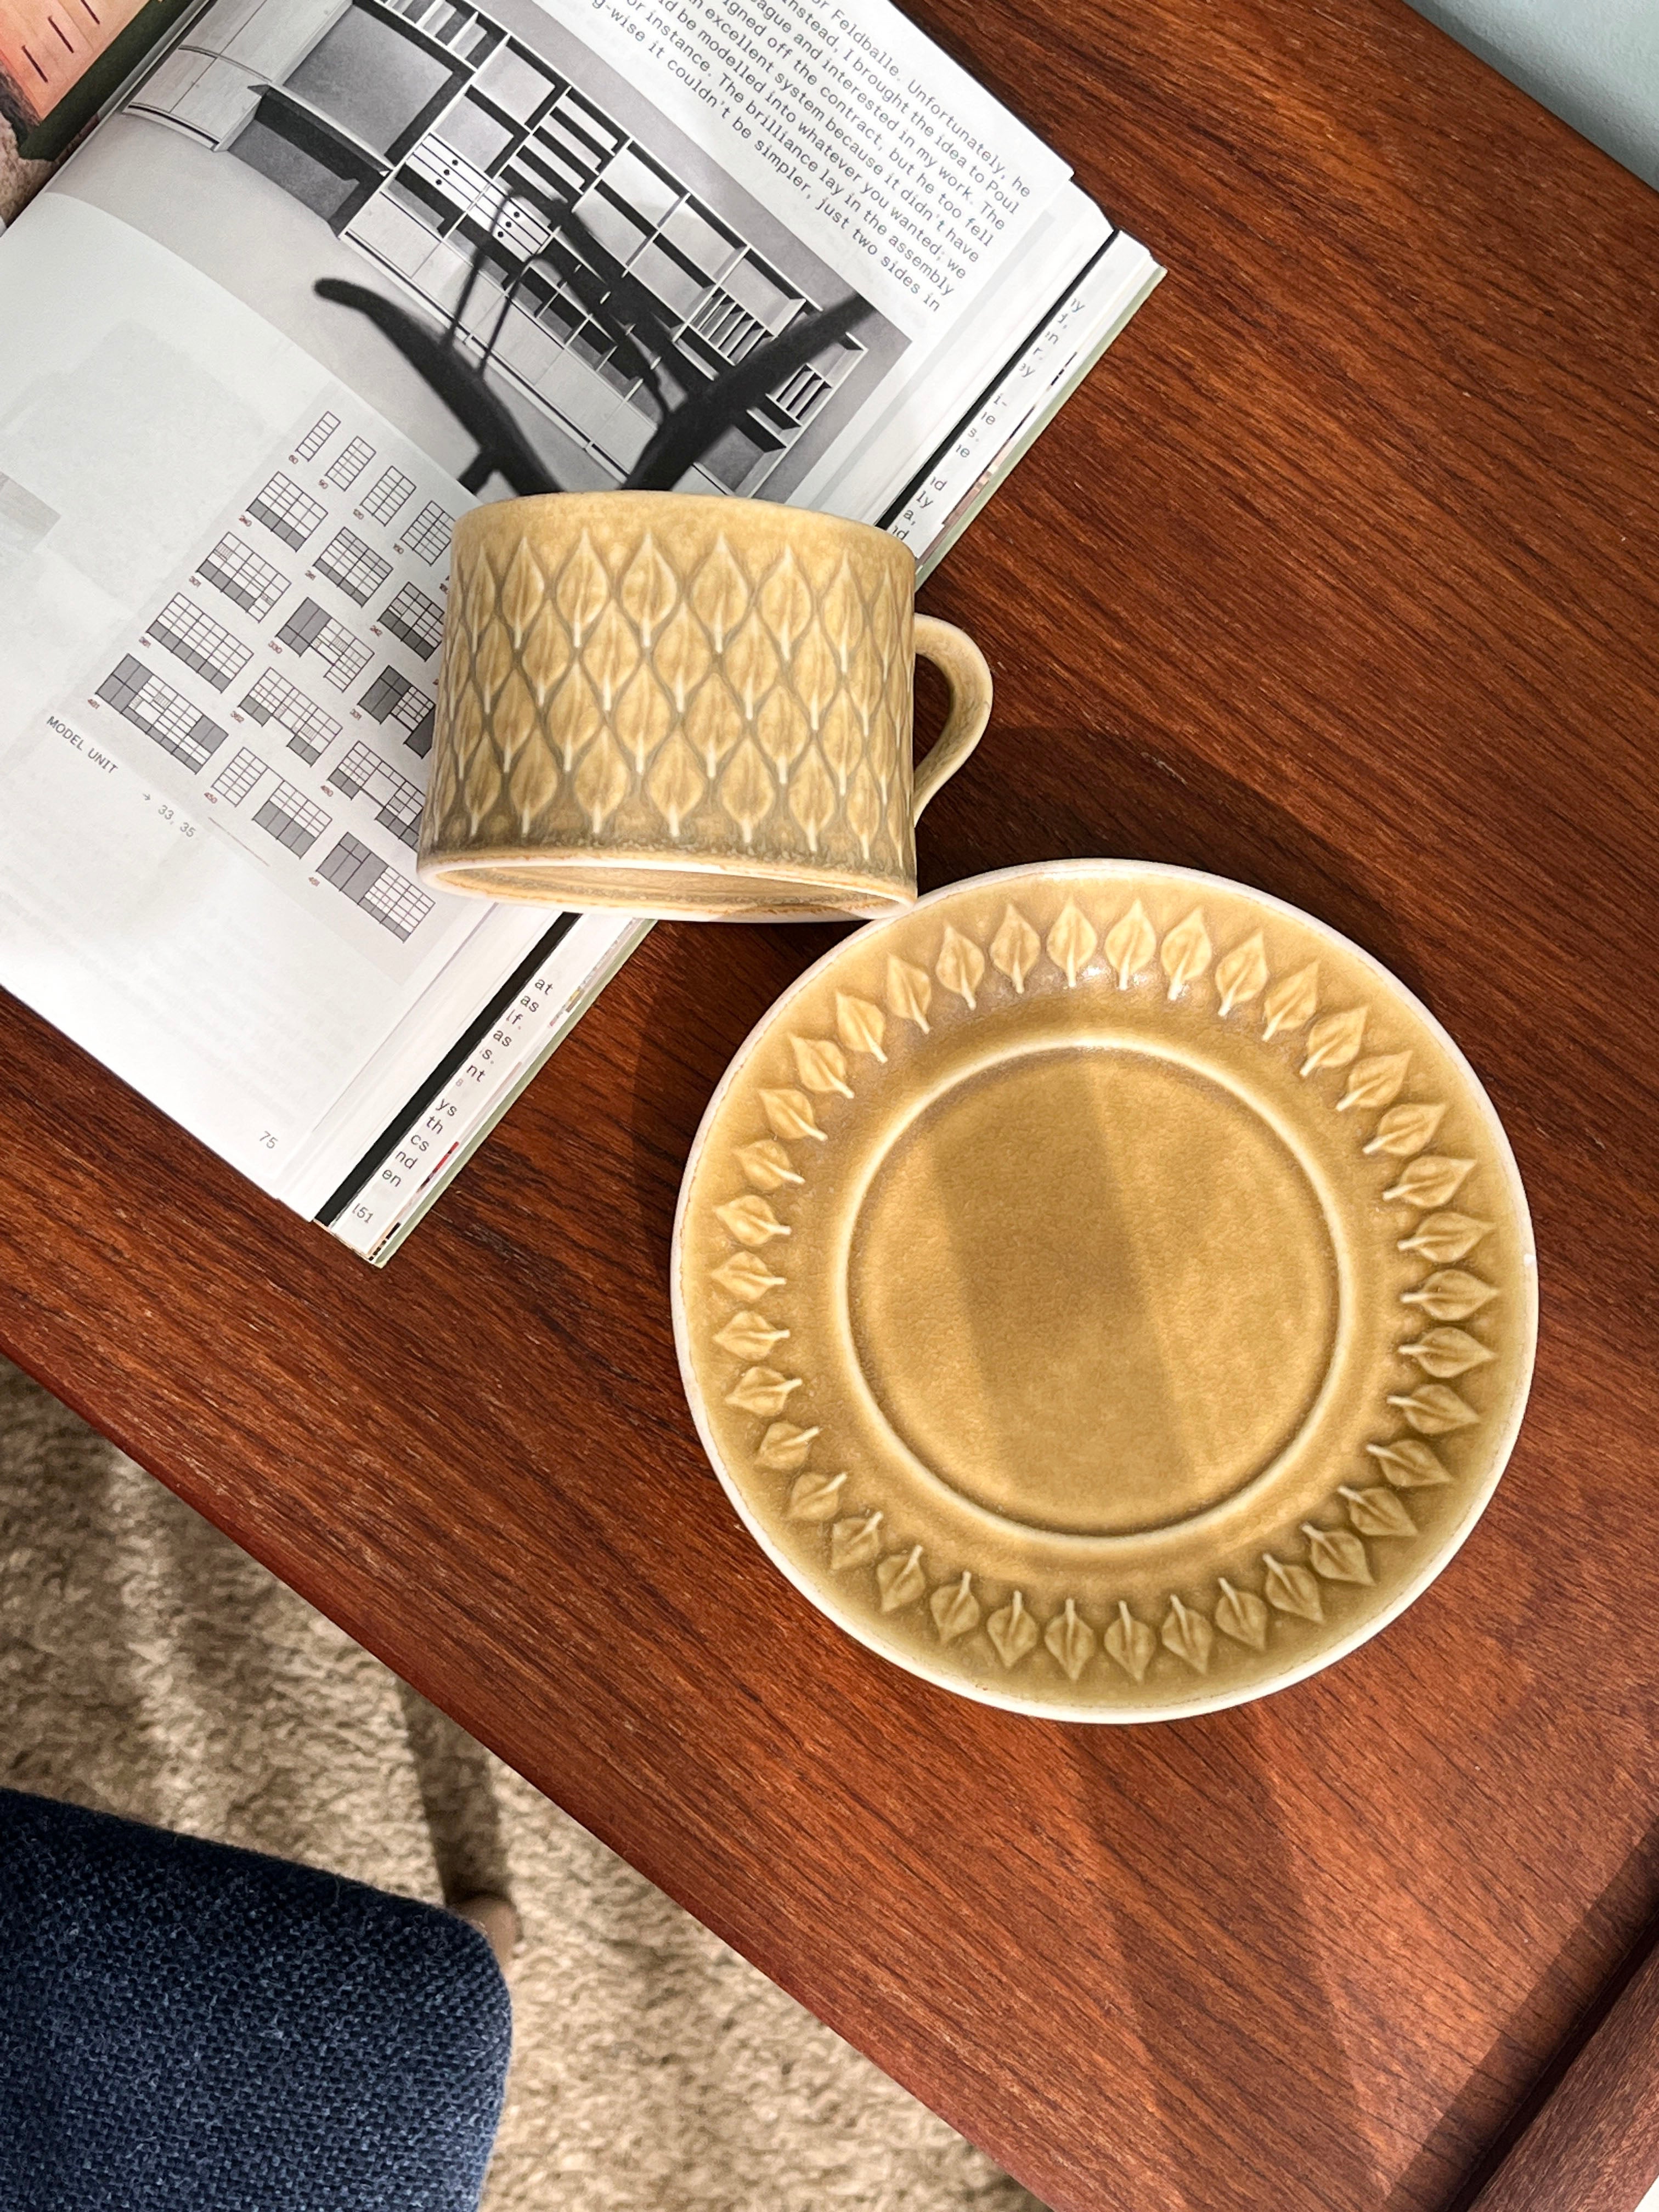 Jens H.Quistgaard Relief Cup and Saucer/イェンス・クイストゴー レリーフ カップ＆ソーサー 北欧ヴィンテージ食器